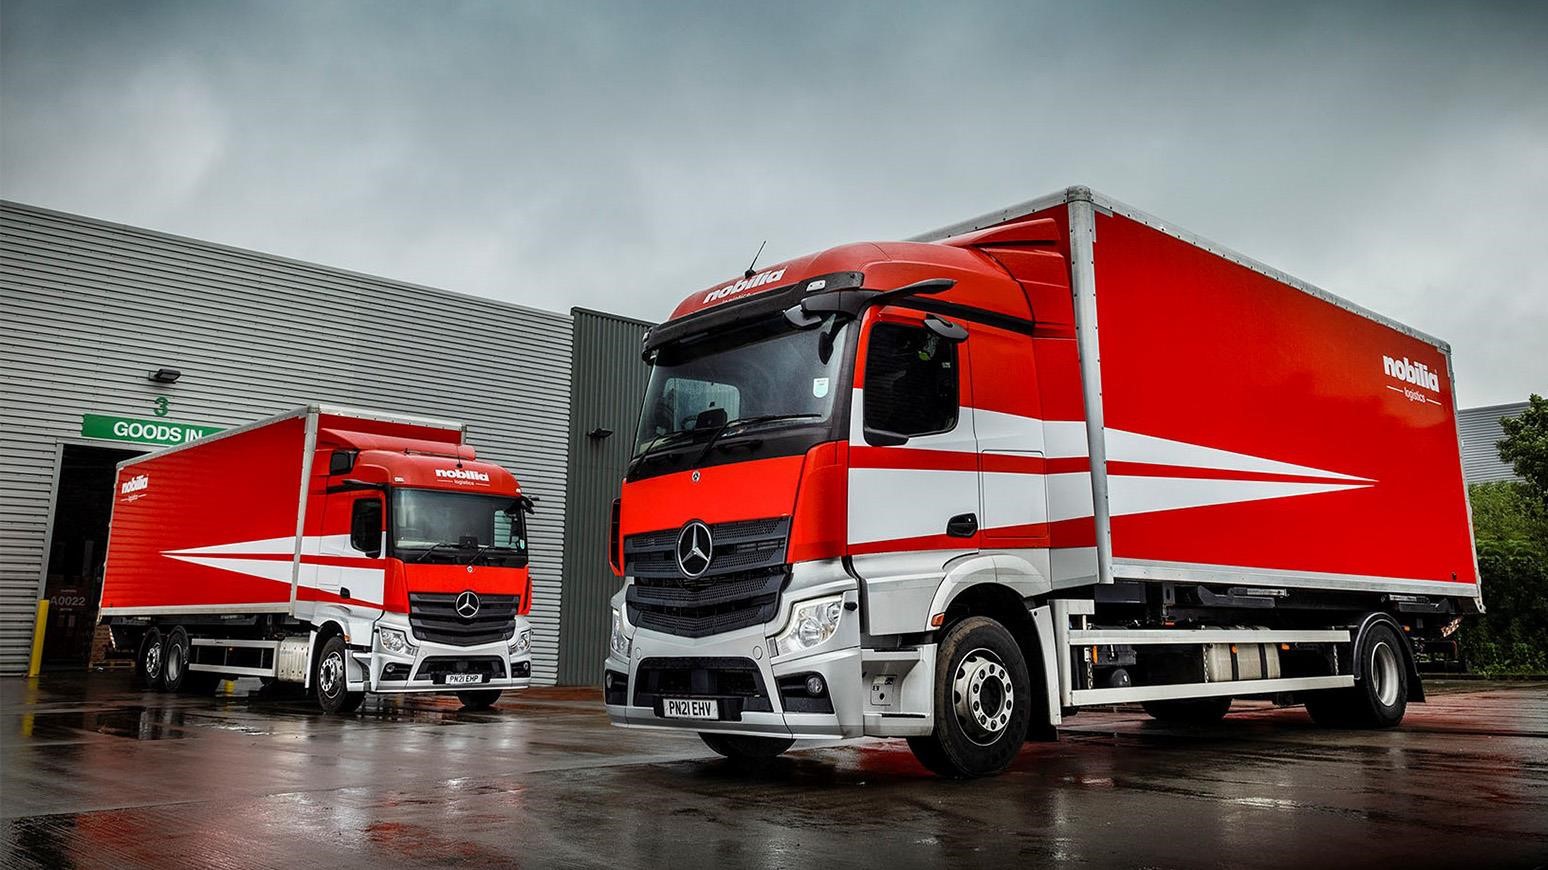 7 New Mercedes-Benz Actros Rigids Replace Ageing Fleet & Bring Cutting-Edge Technology To Nobilia Projects